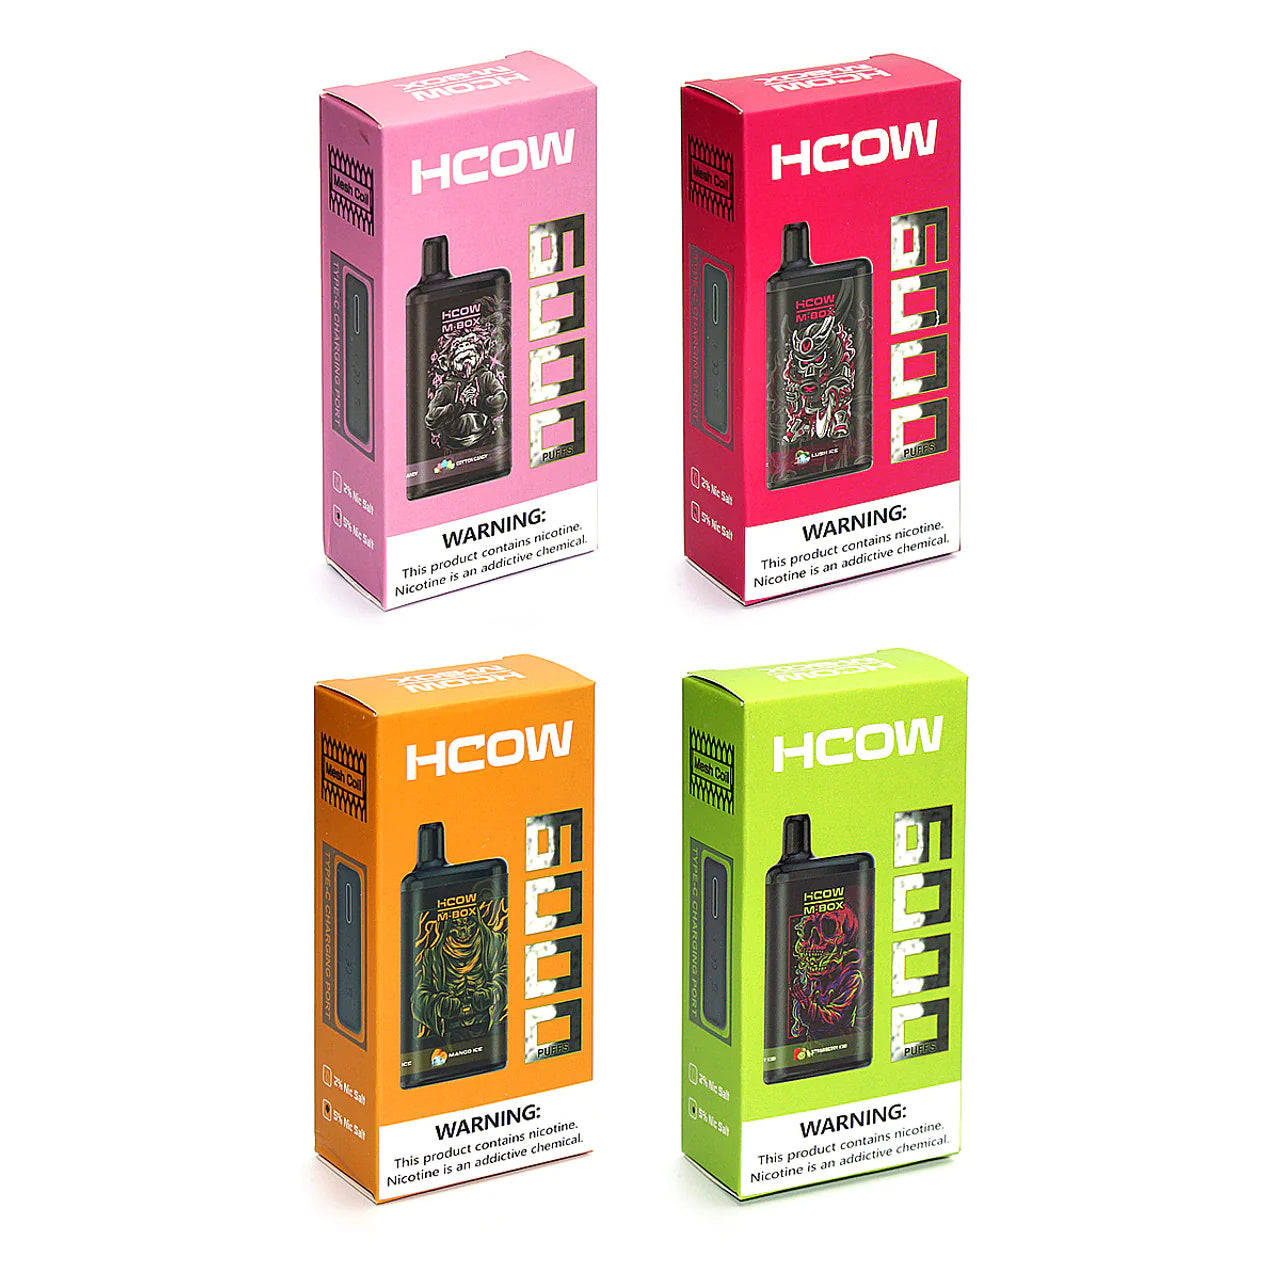 Exploring the Features and Models of HCOW Disposable Vapes